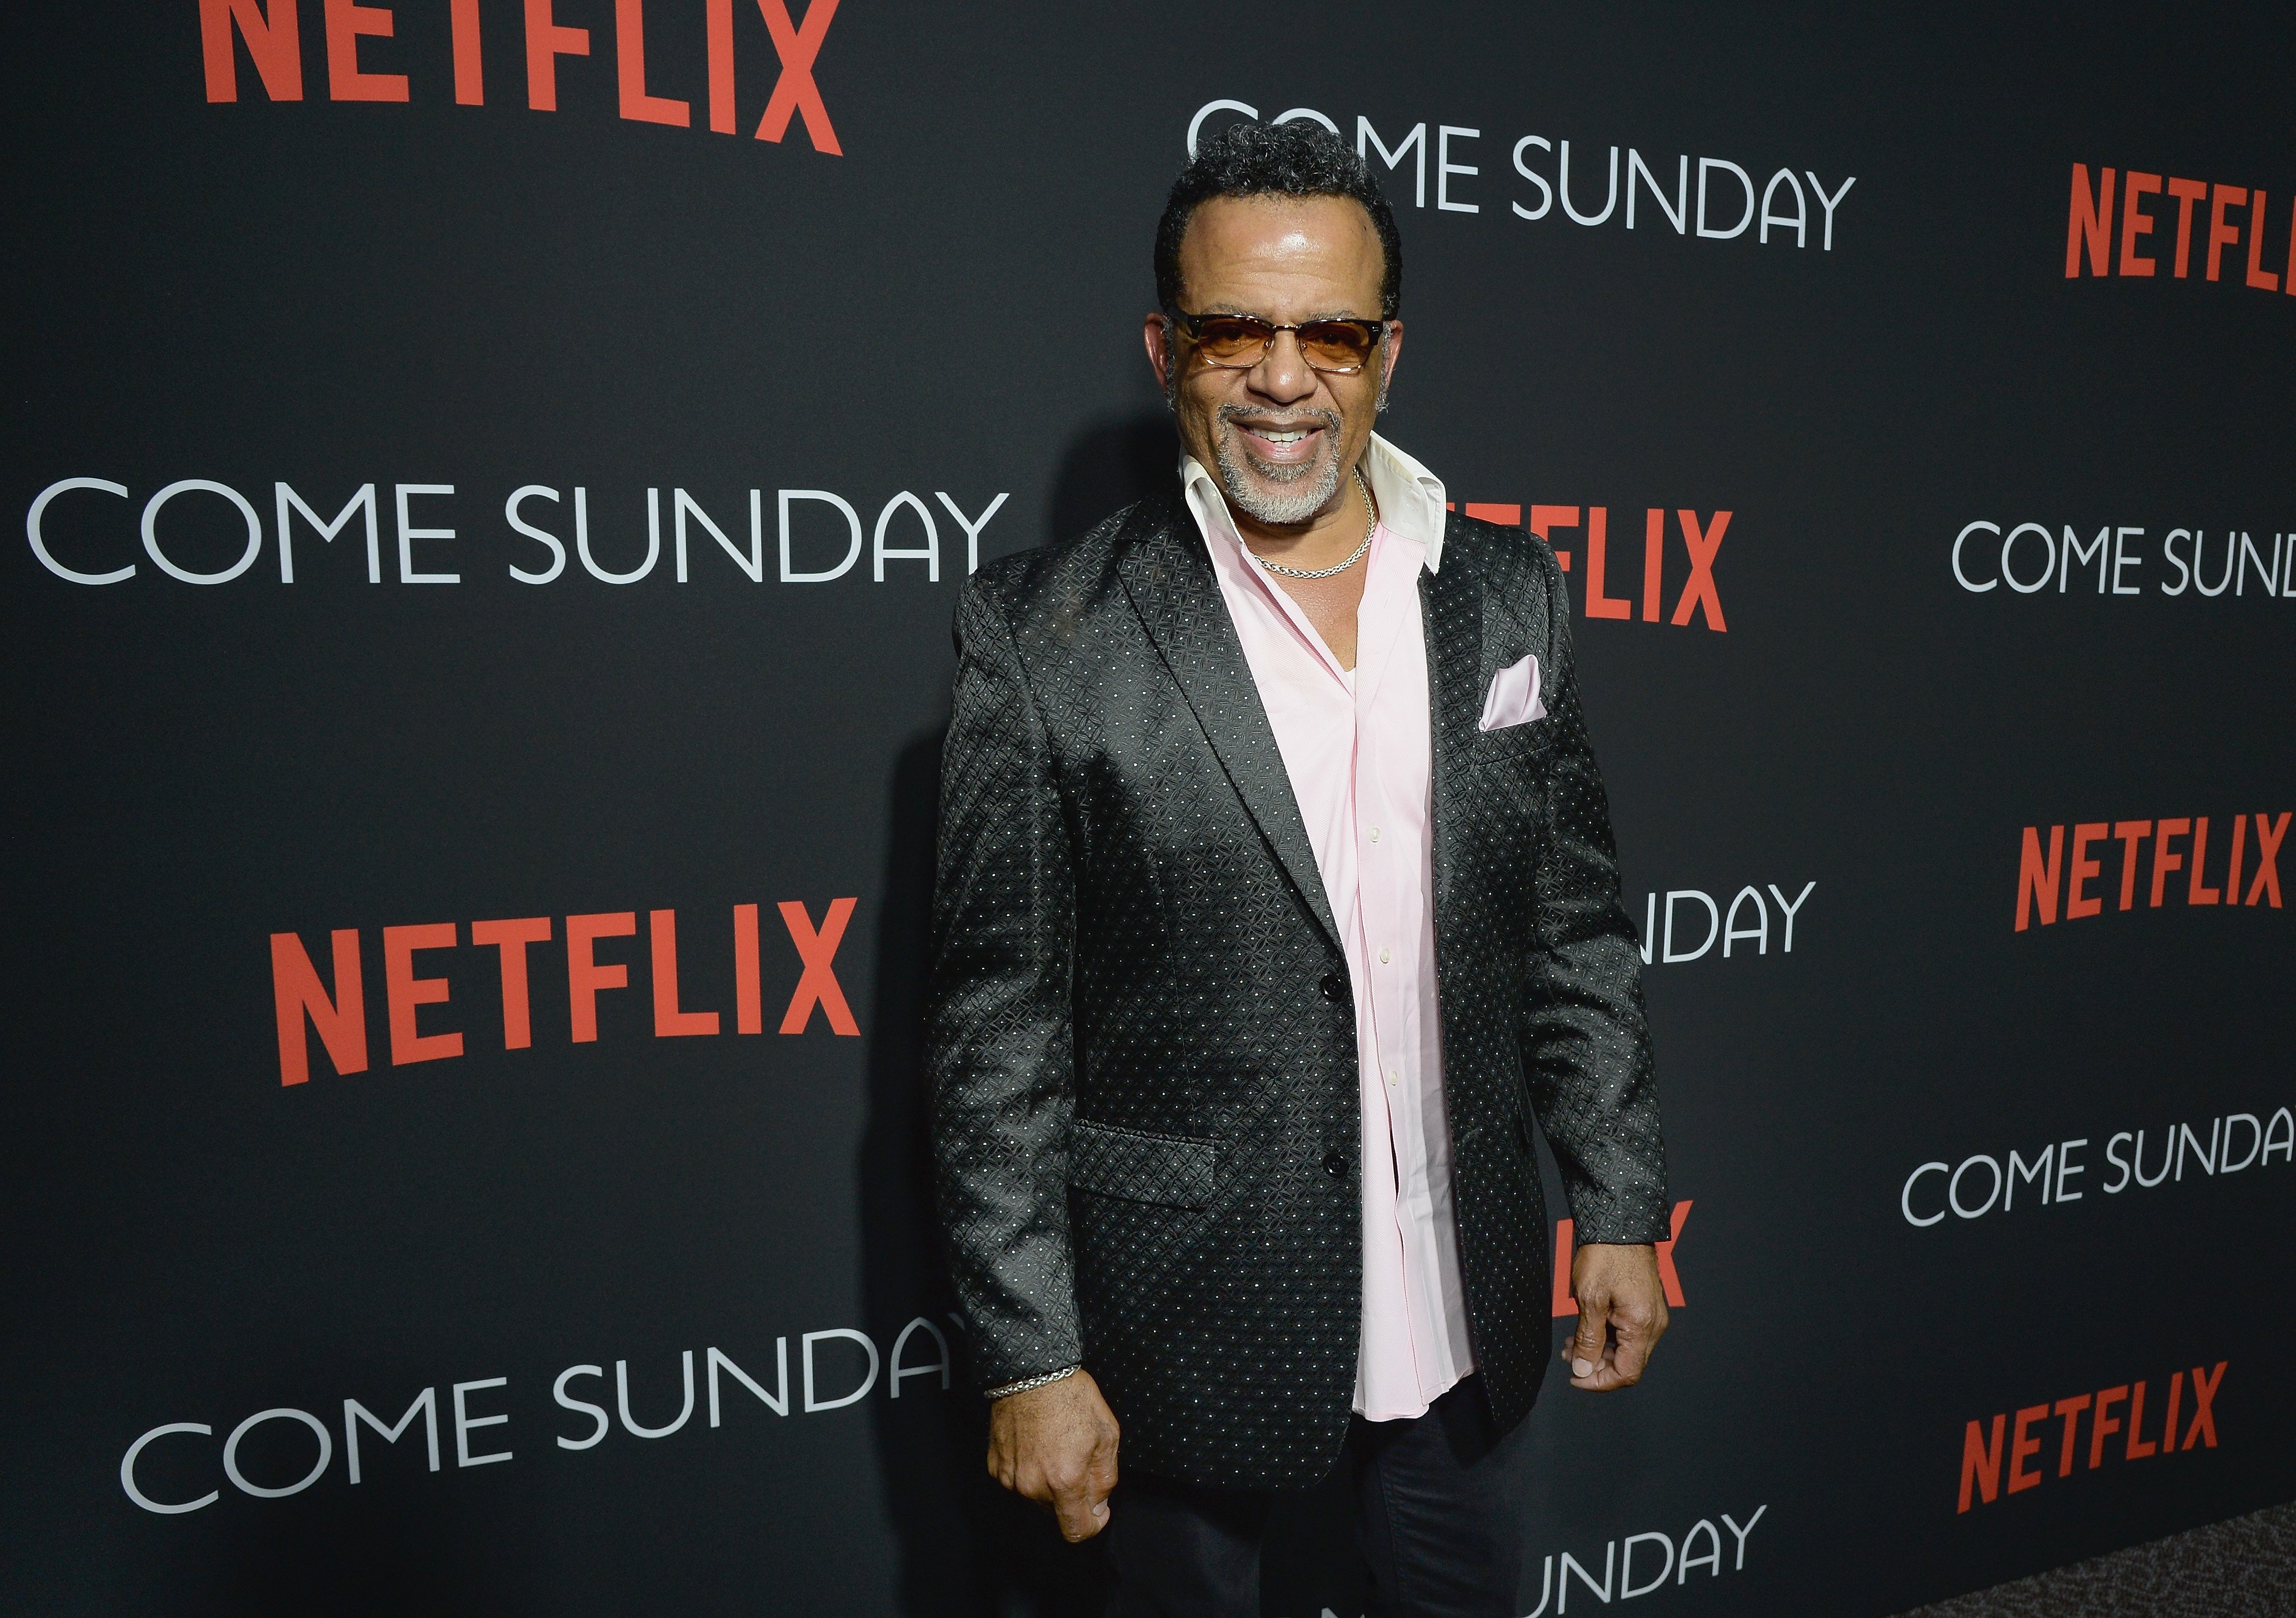 Carlton Pearson attends the special screening of the Netflix film "Come Sunday" at the Directors Guild of America Theater in Los Angeles on April 9, 2018 | Photo: GettyImages